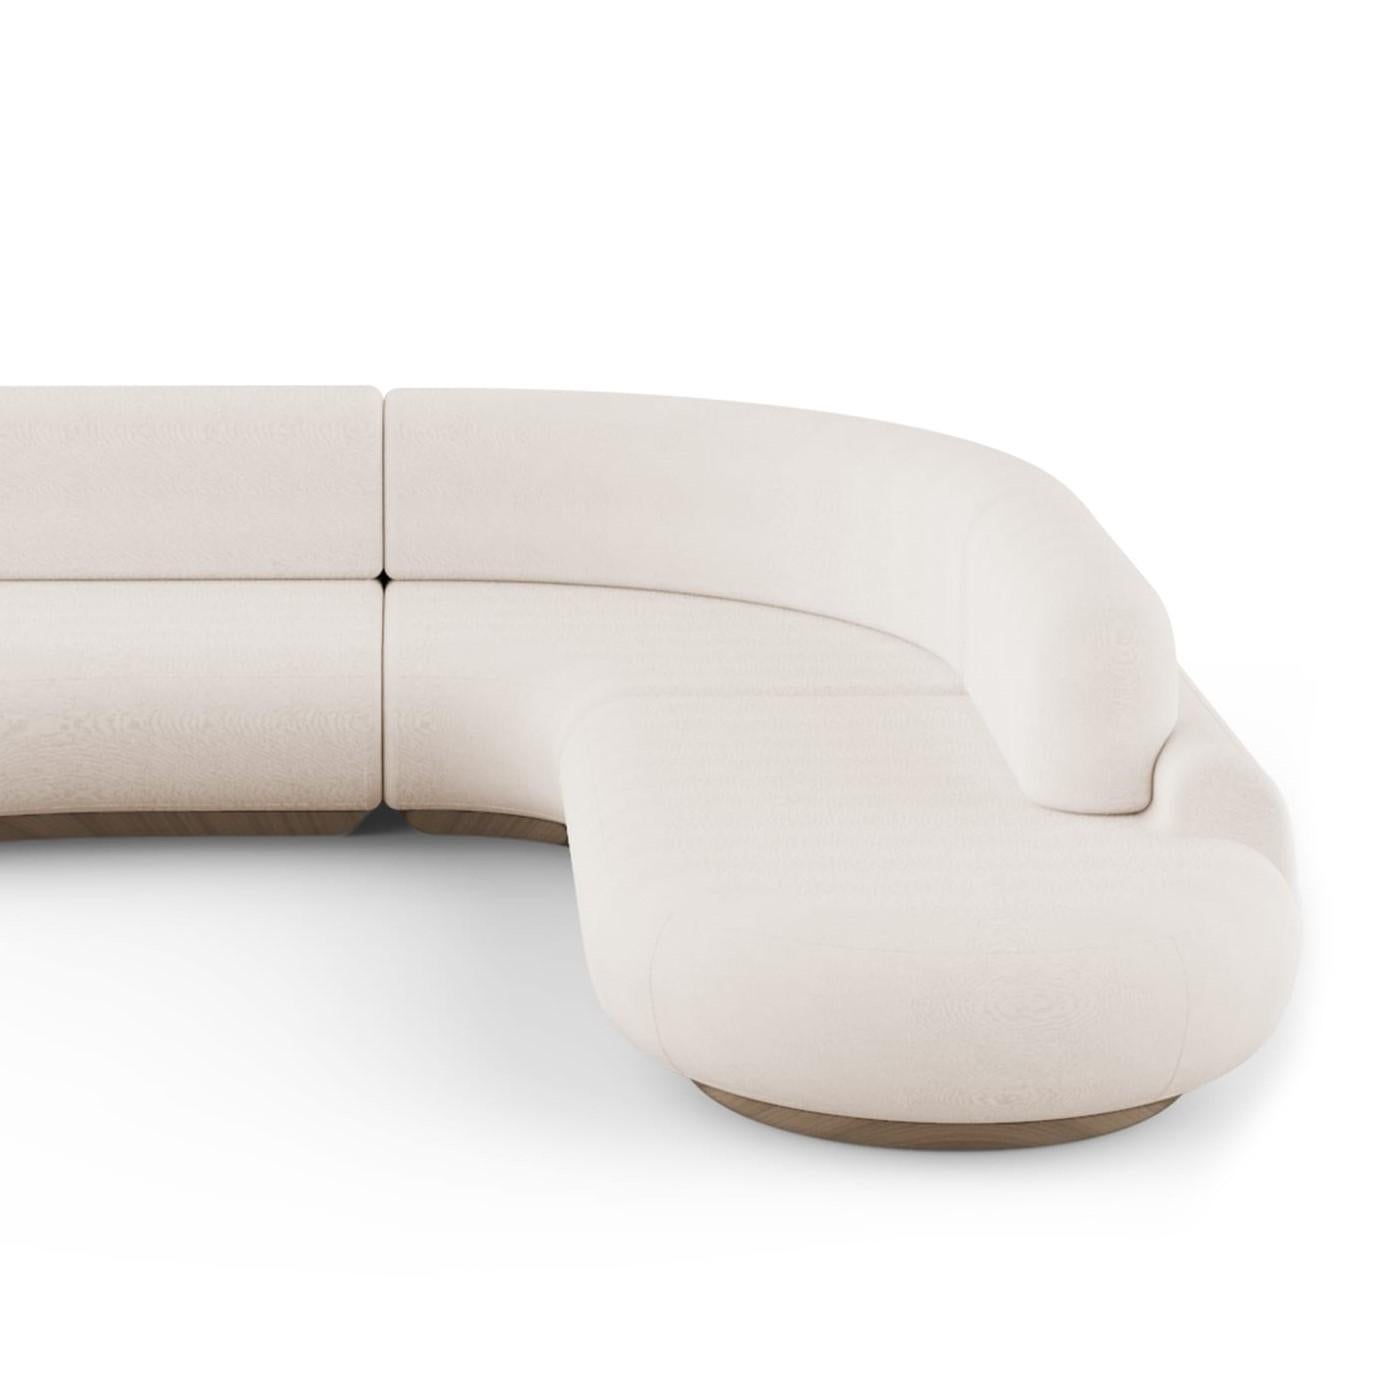 Portuguese Naked Sofa by DOOQ